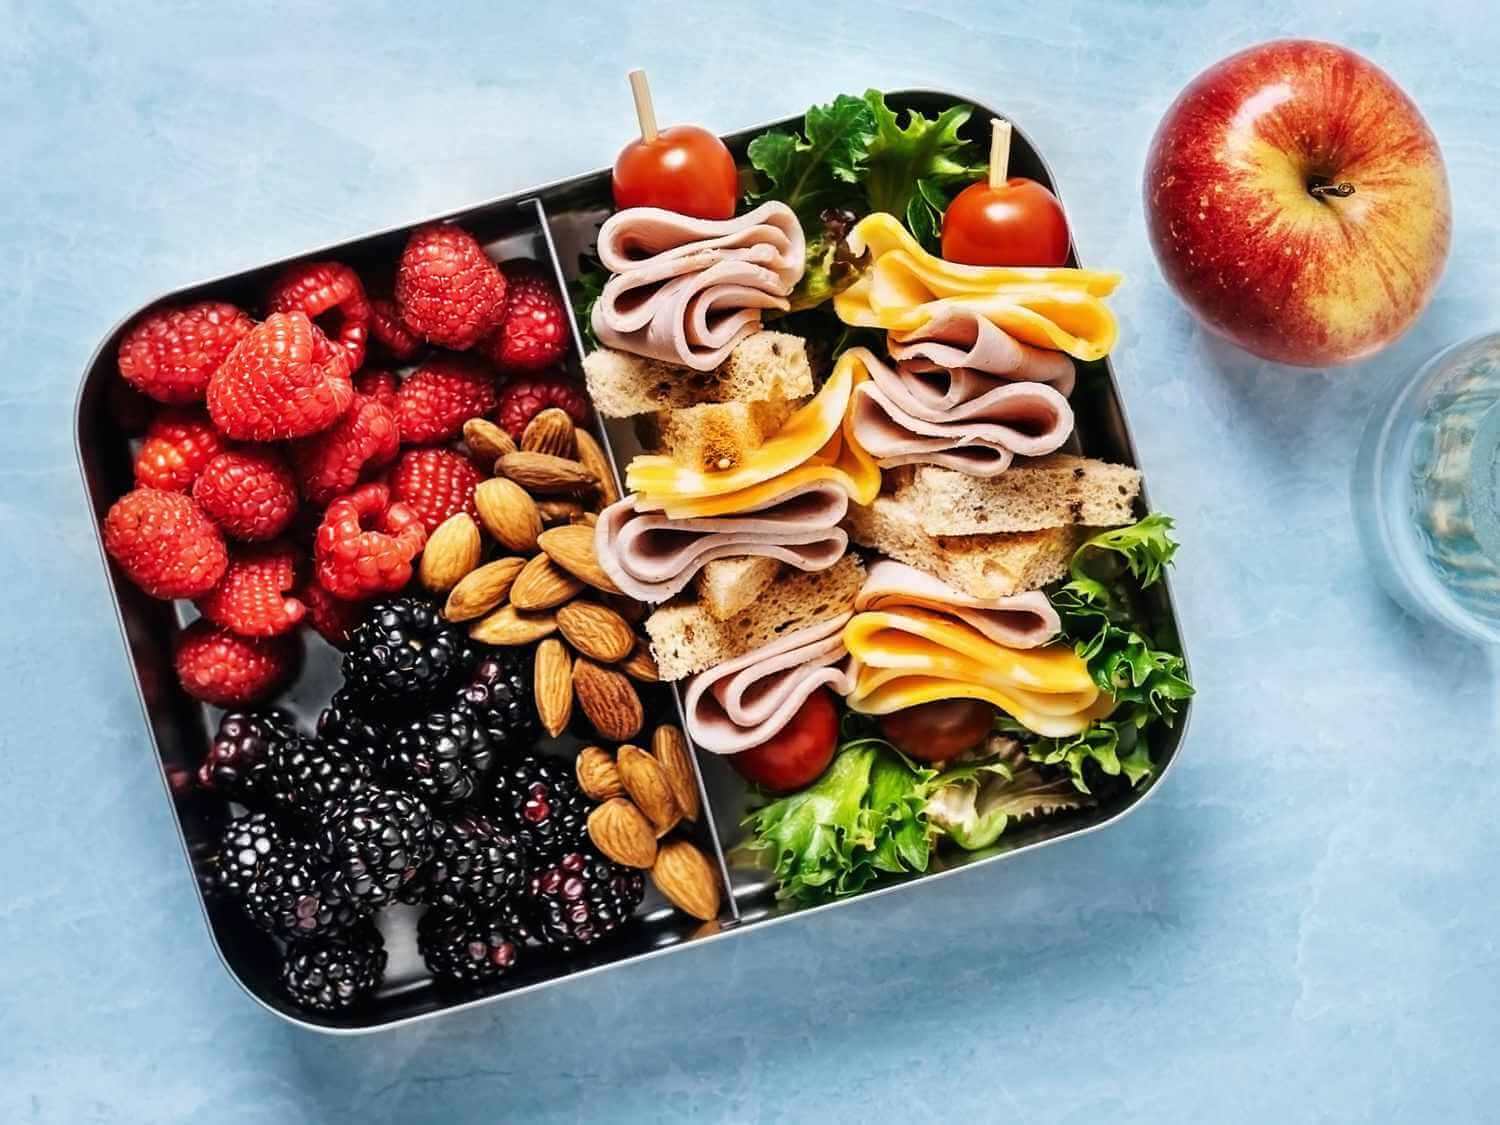 Healthy lunch ideas for inspiration